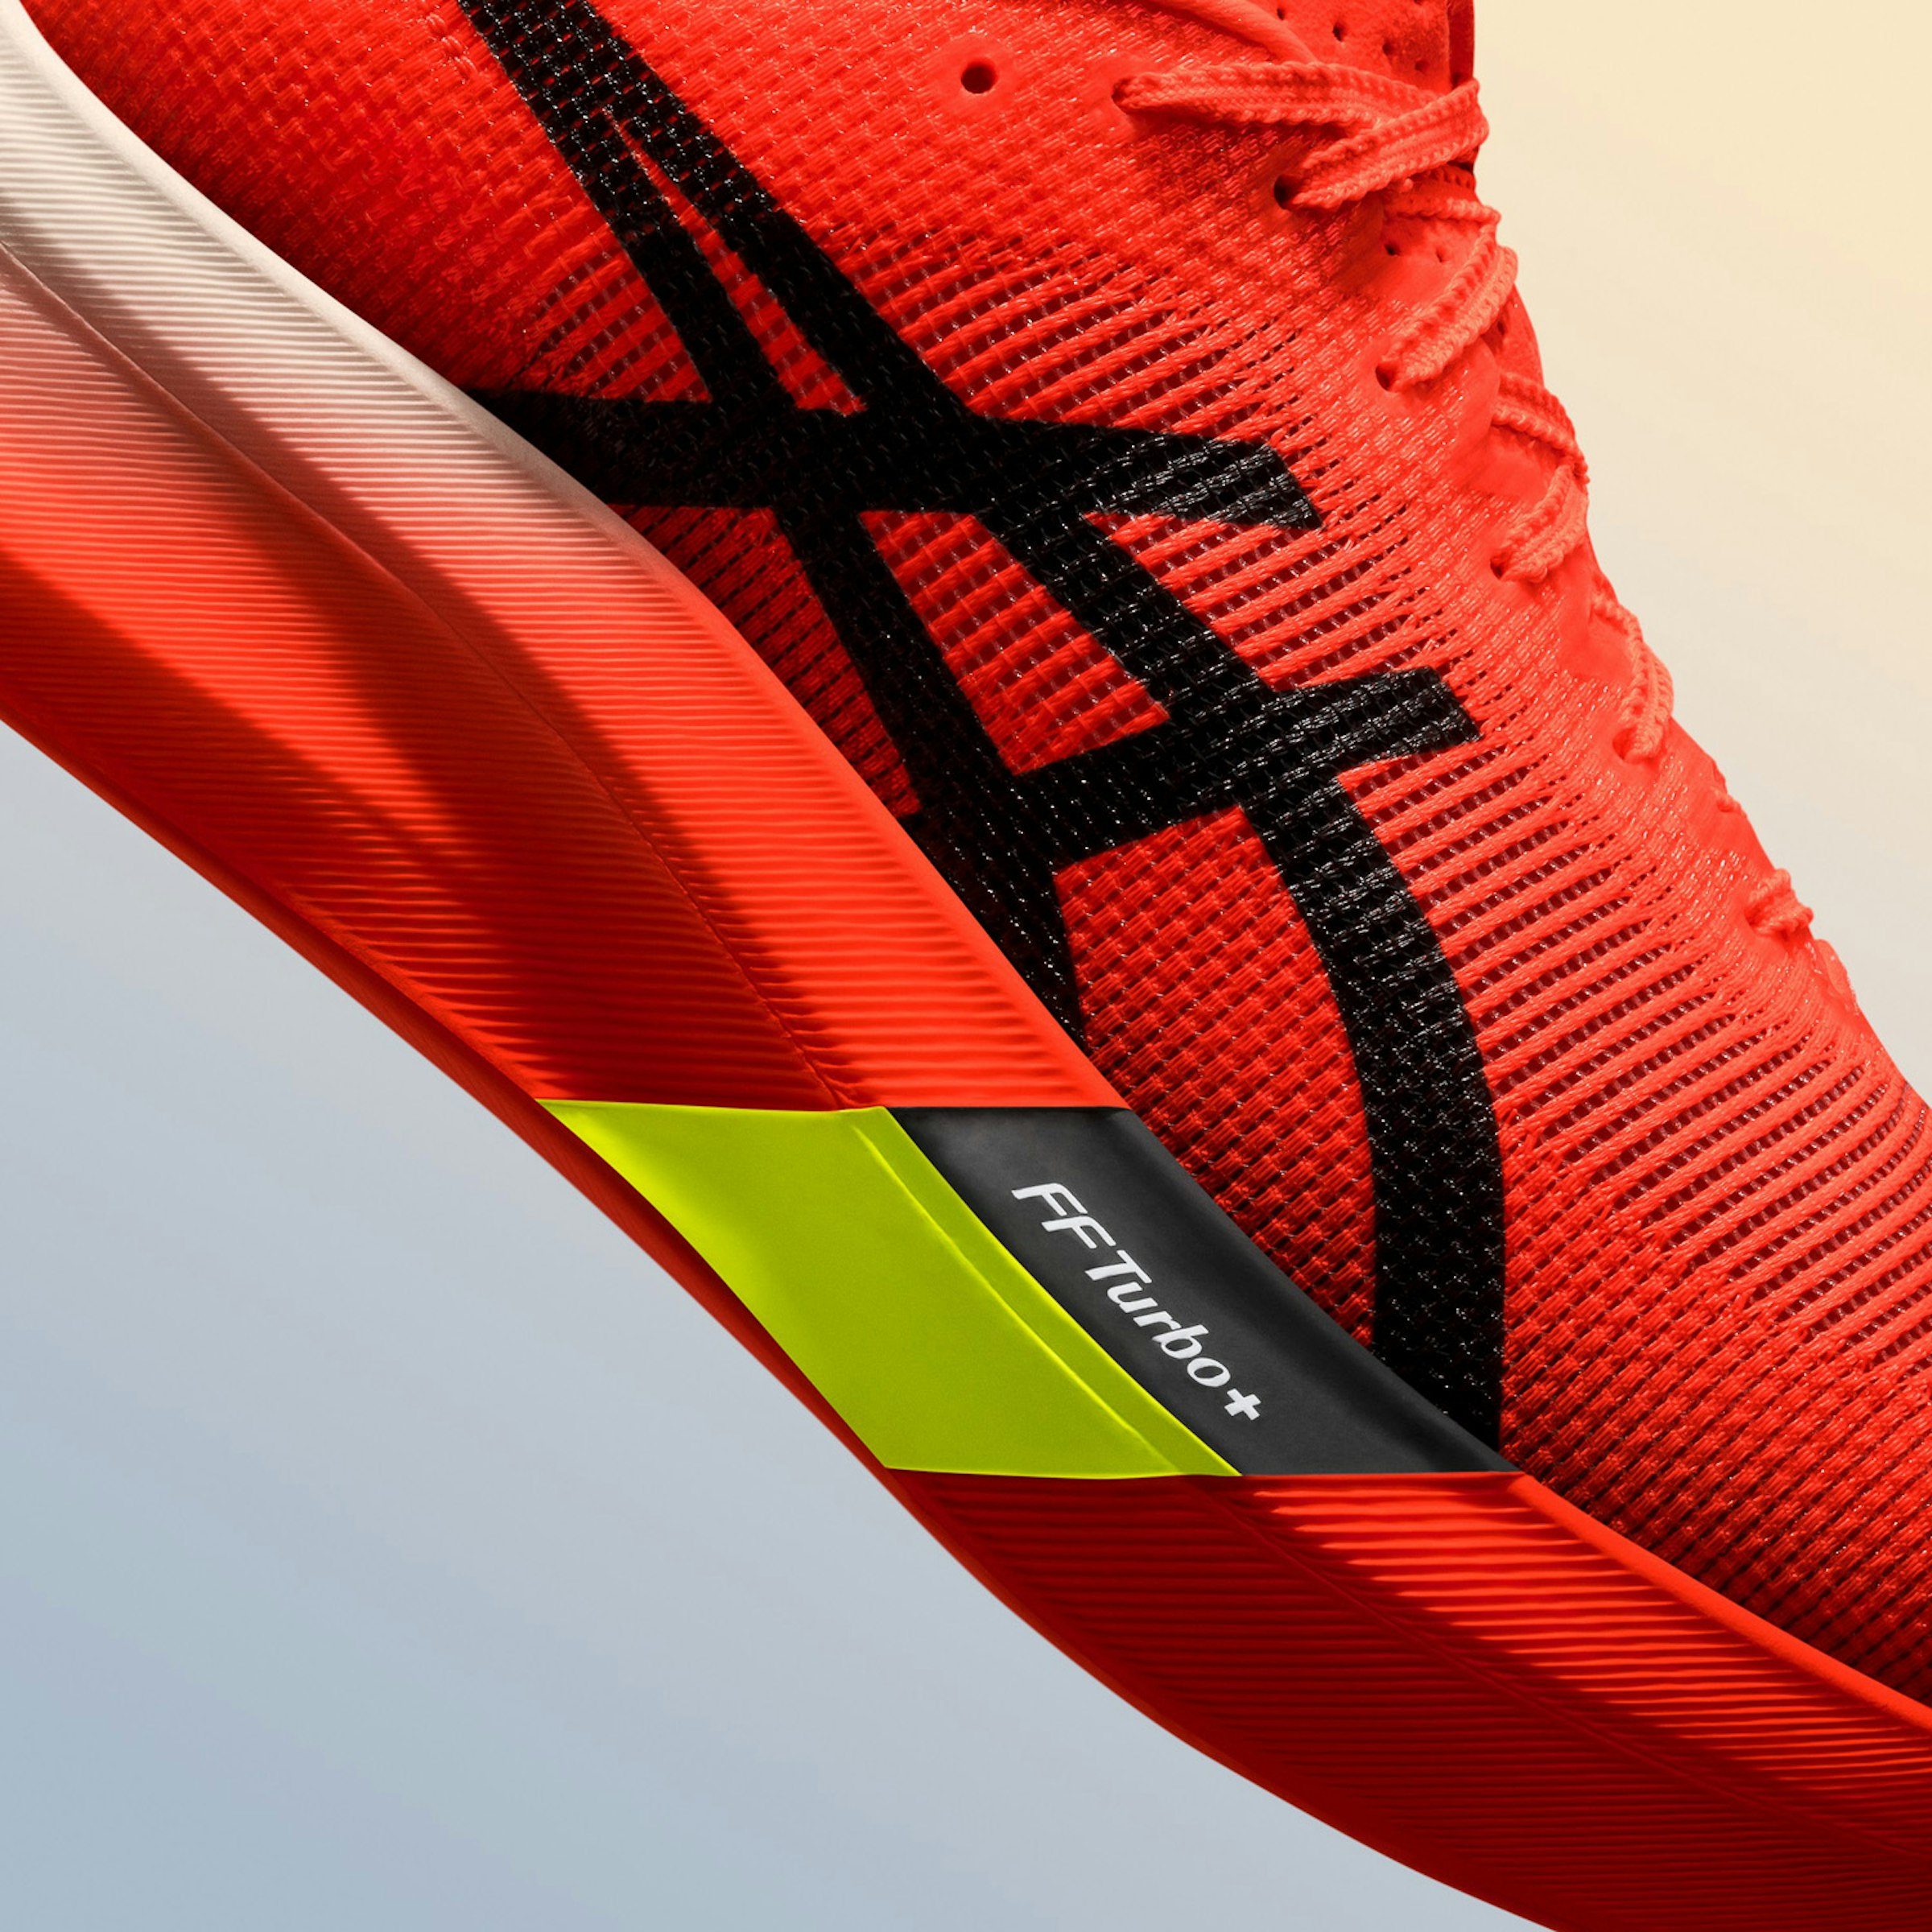 The new material, FF TURBO PLUS, is adopted for the midsole.